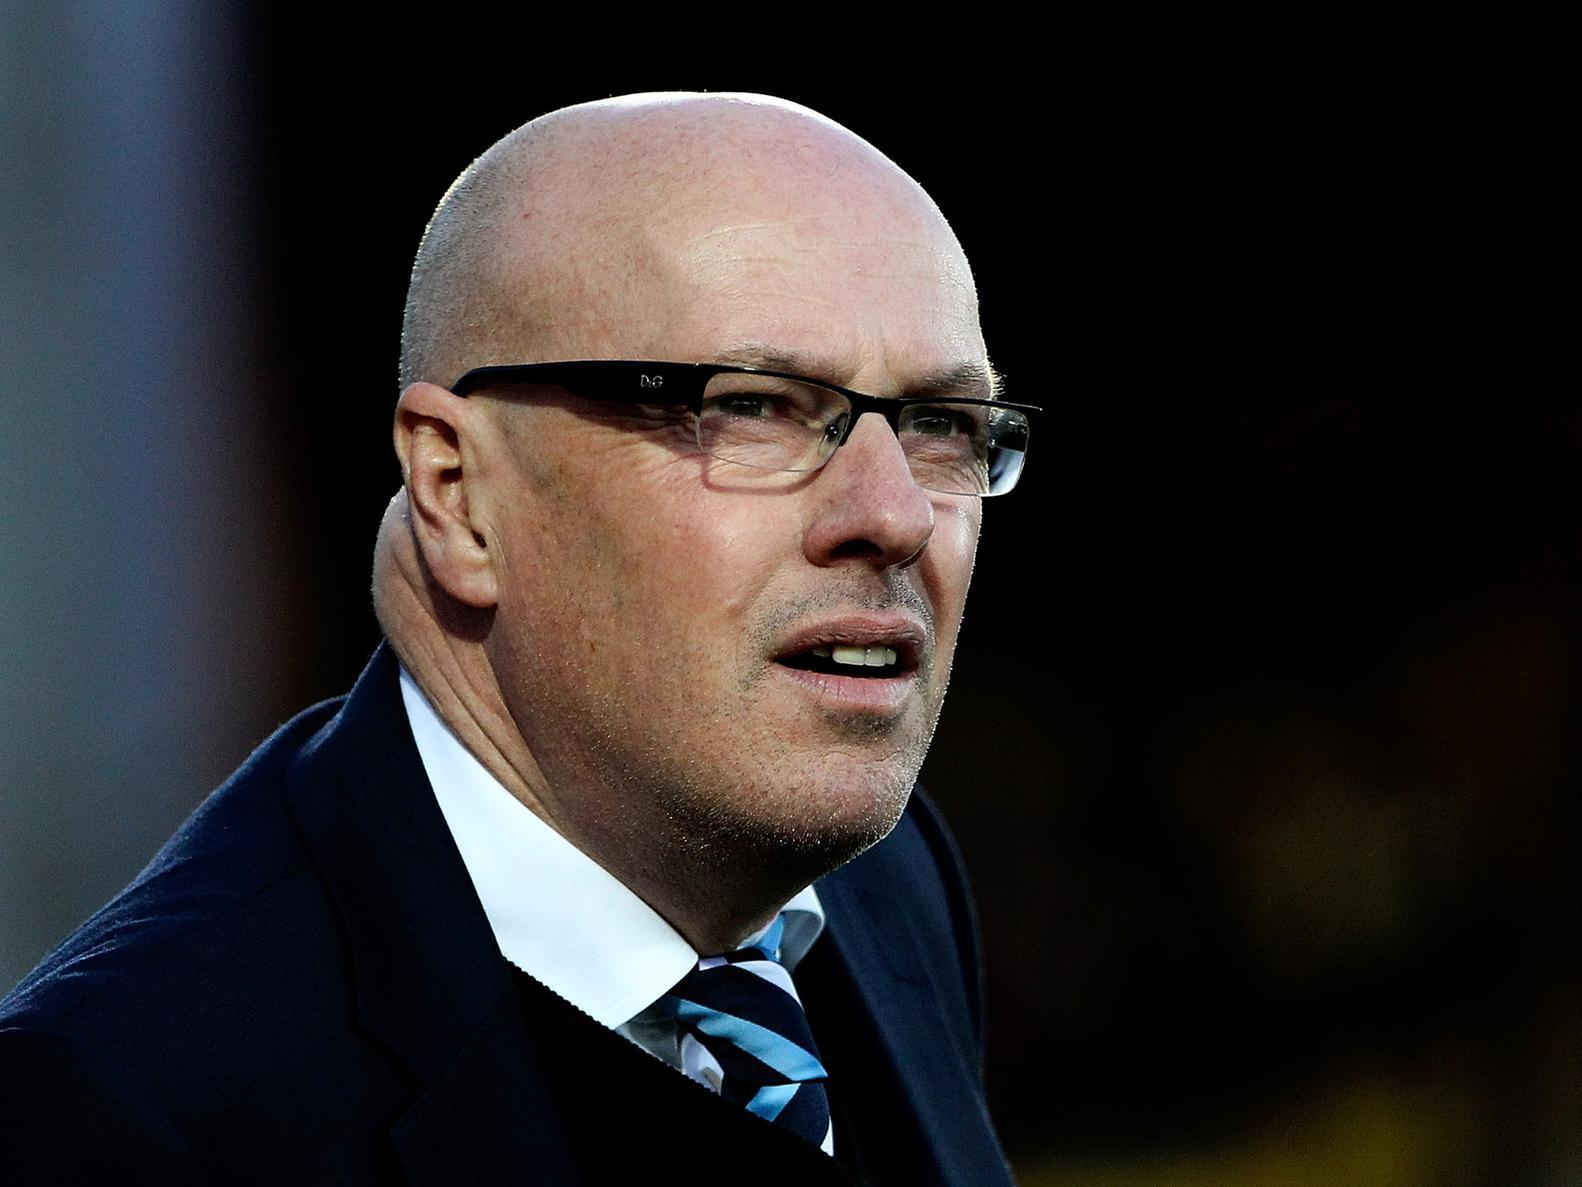 Poor Brian McDermott. He thought he'd been sacked prior to the Huddersfield Town game, yet was re-instated after the 5-1 win, but then eventually did leave at the end of the season. McDermott's current assignment is scouting for Arsenal; he actually started as a scout at Reading before moving into management.